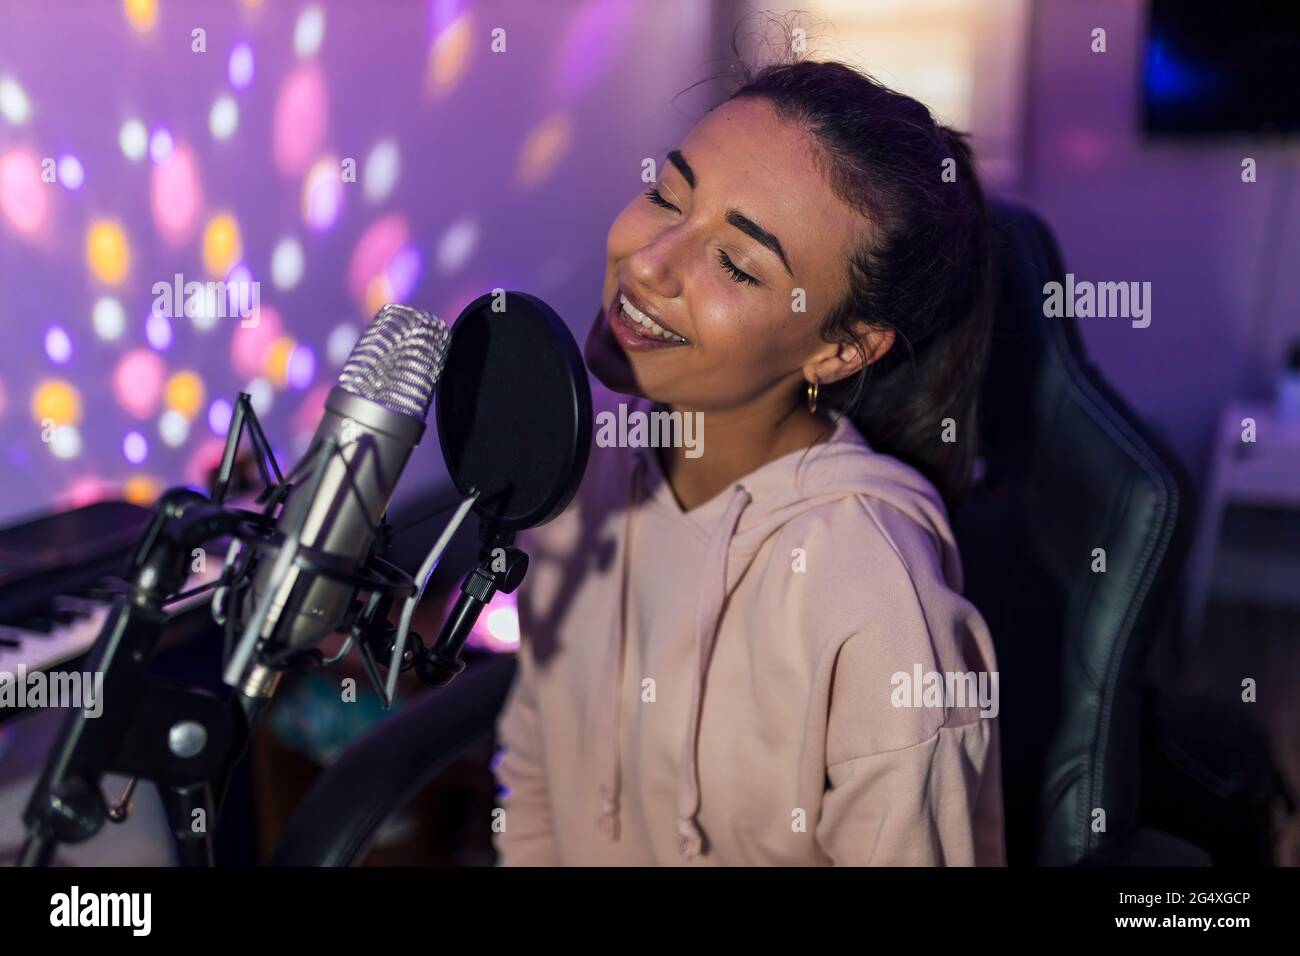 Female singer with eyes closed singing in studio Stock Photo